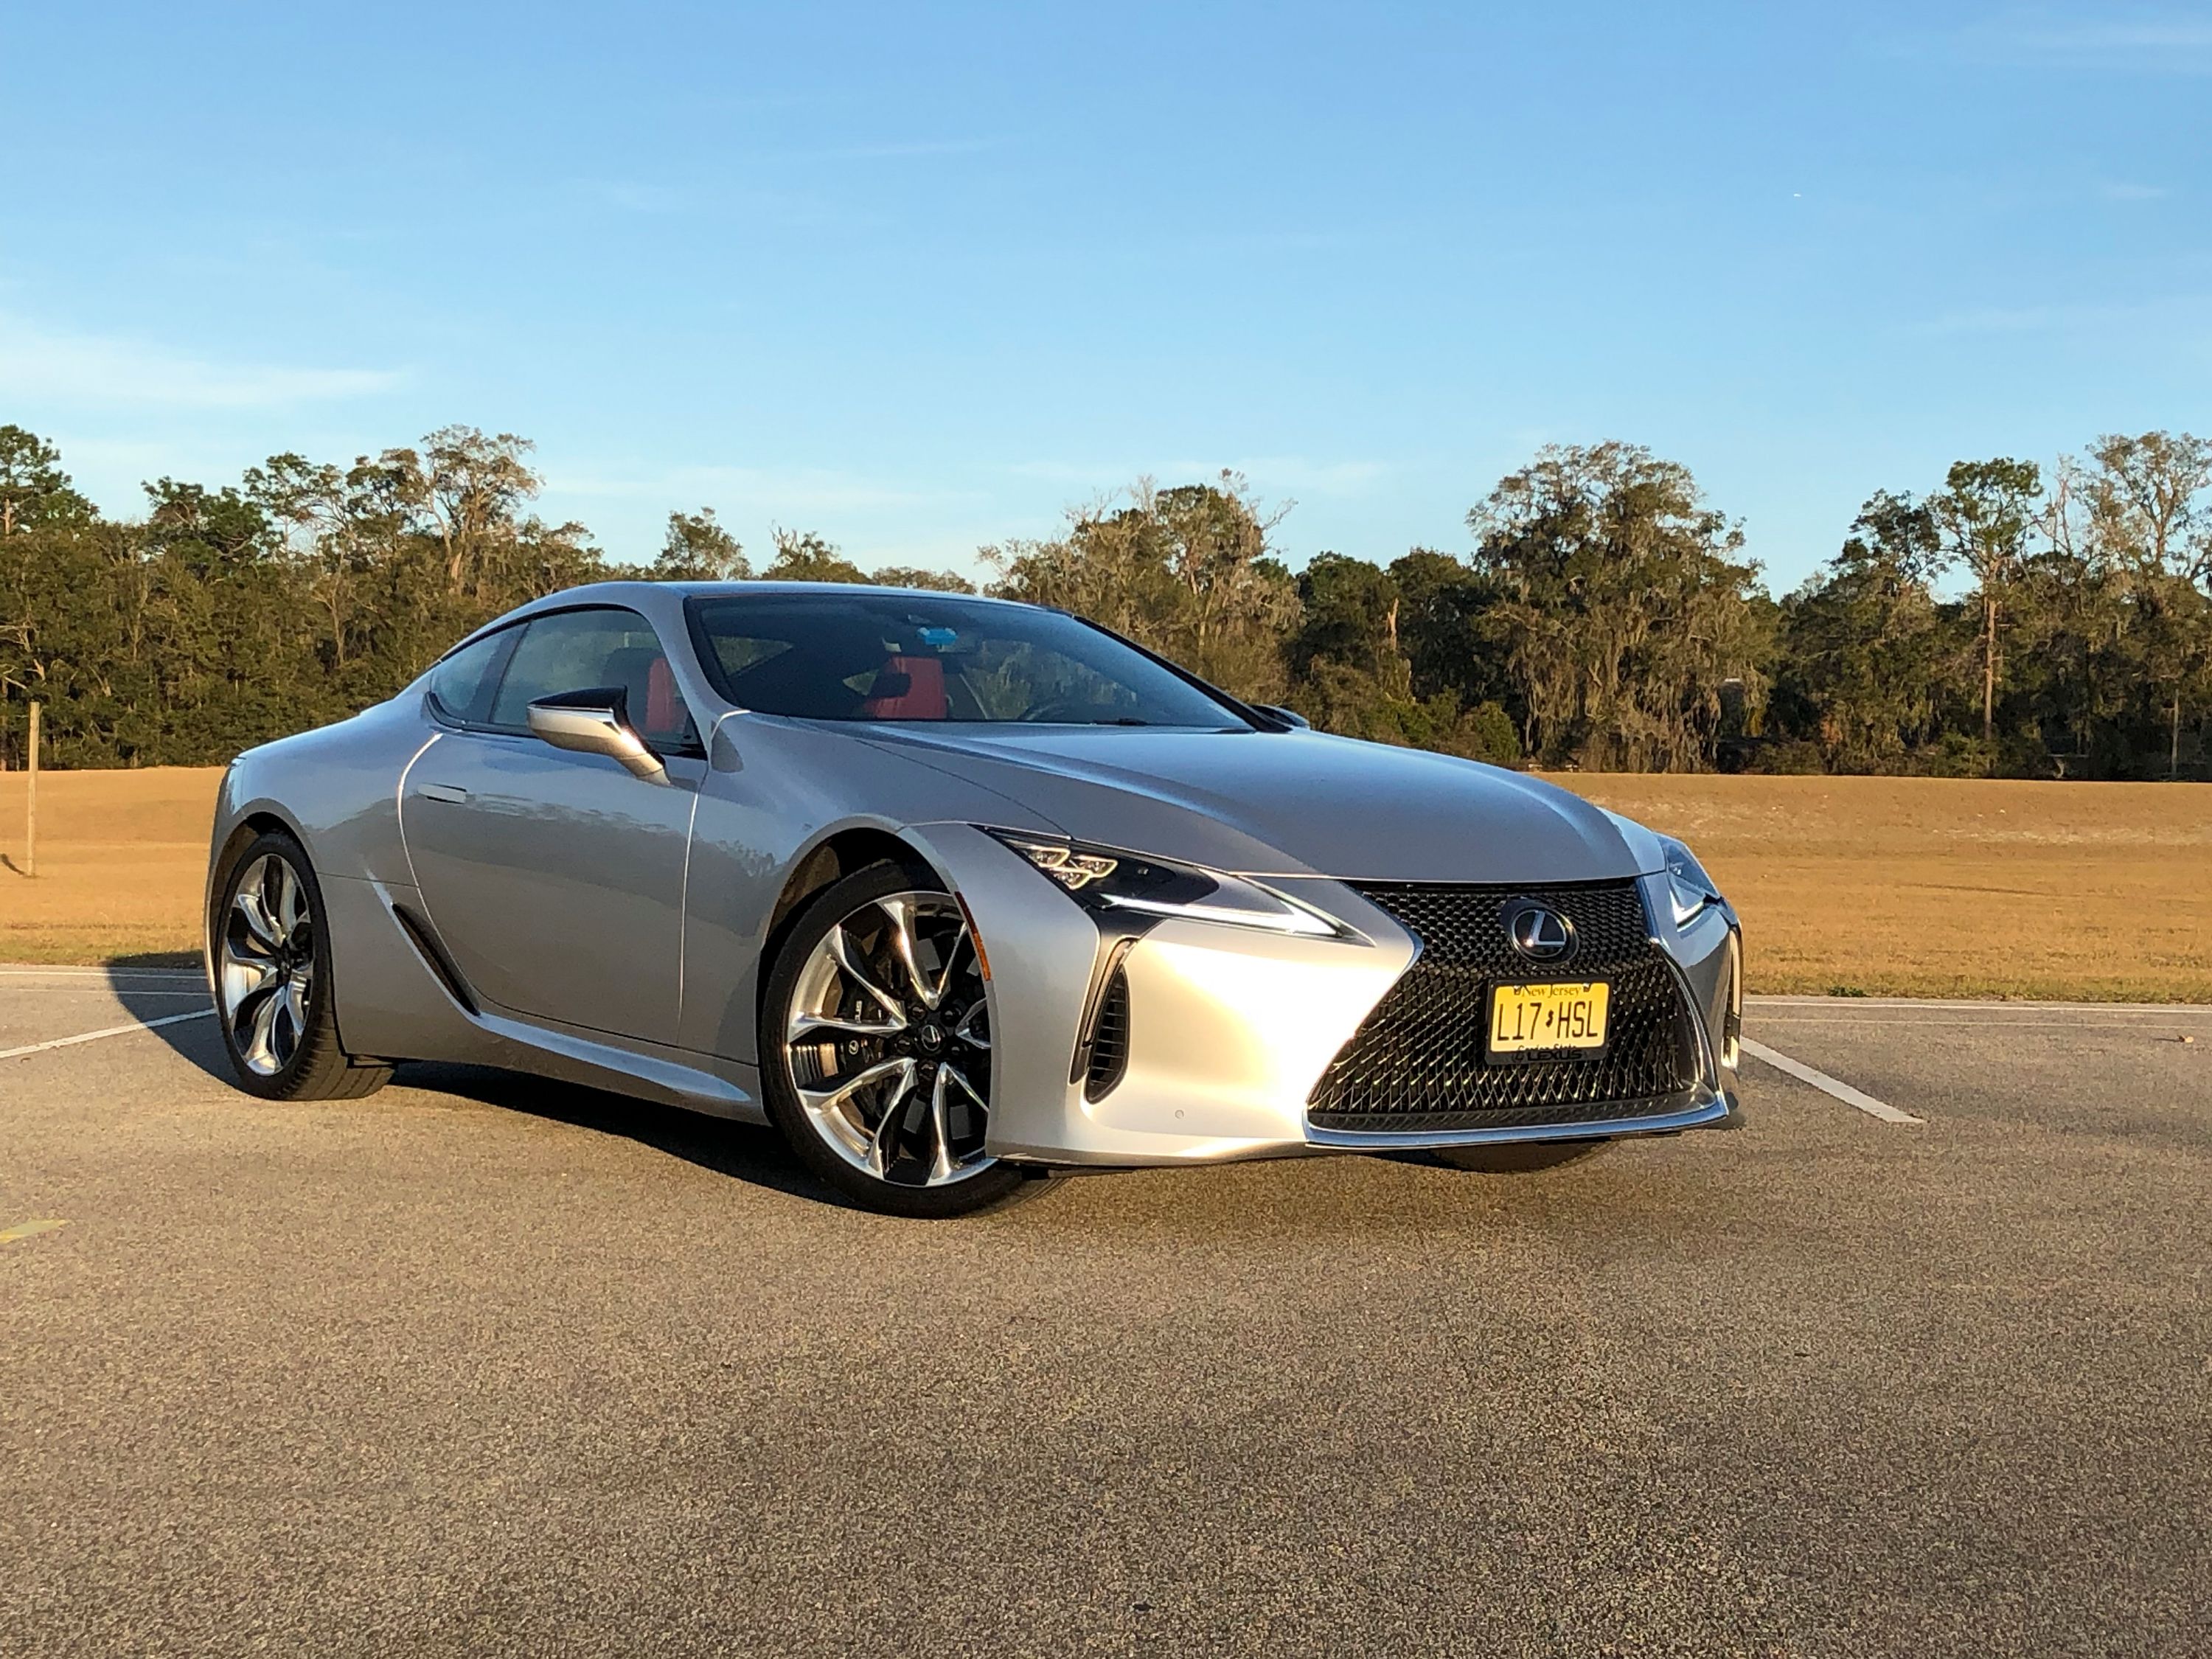 2019 The 2018 Lexus LC500 is the Perfect Ride for a Valentine's Day Date